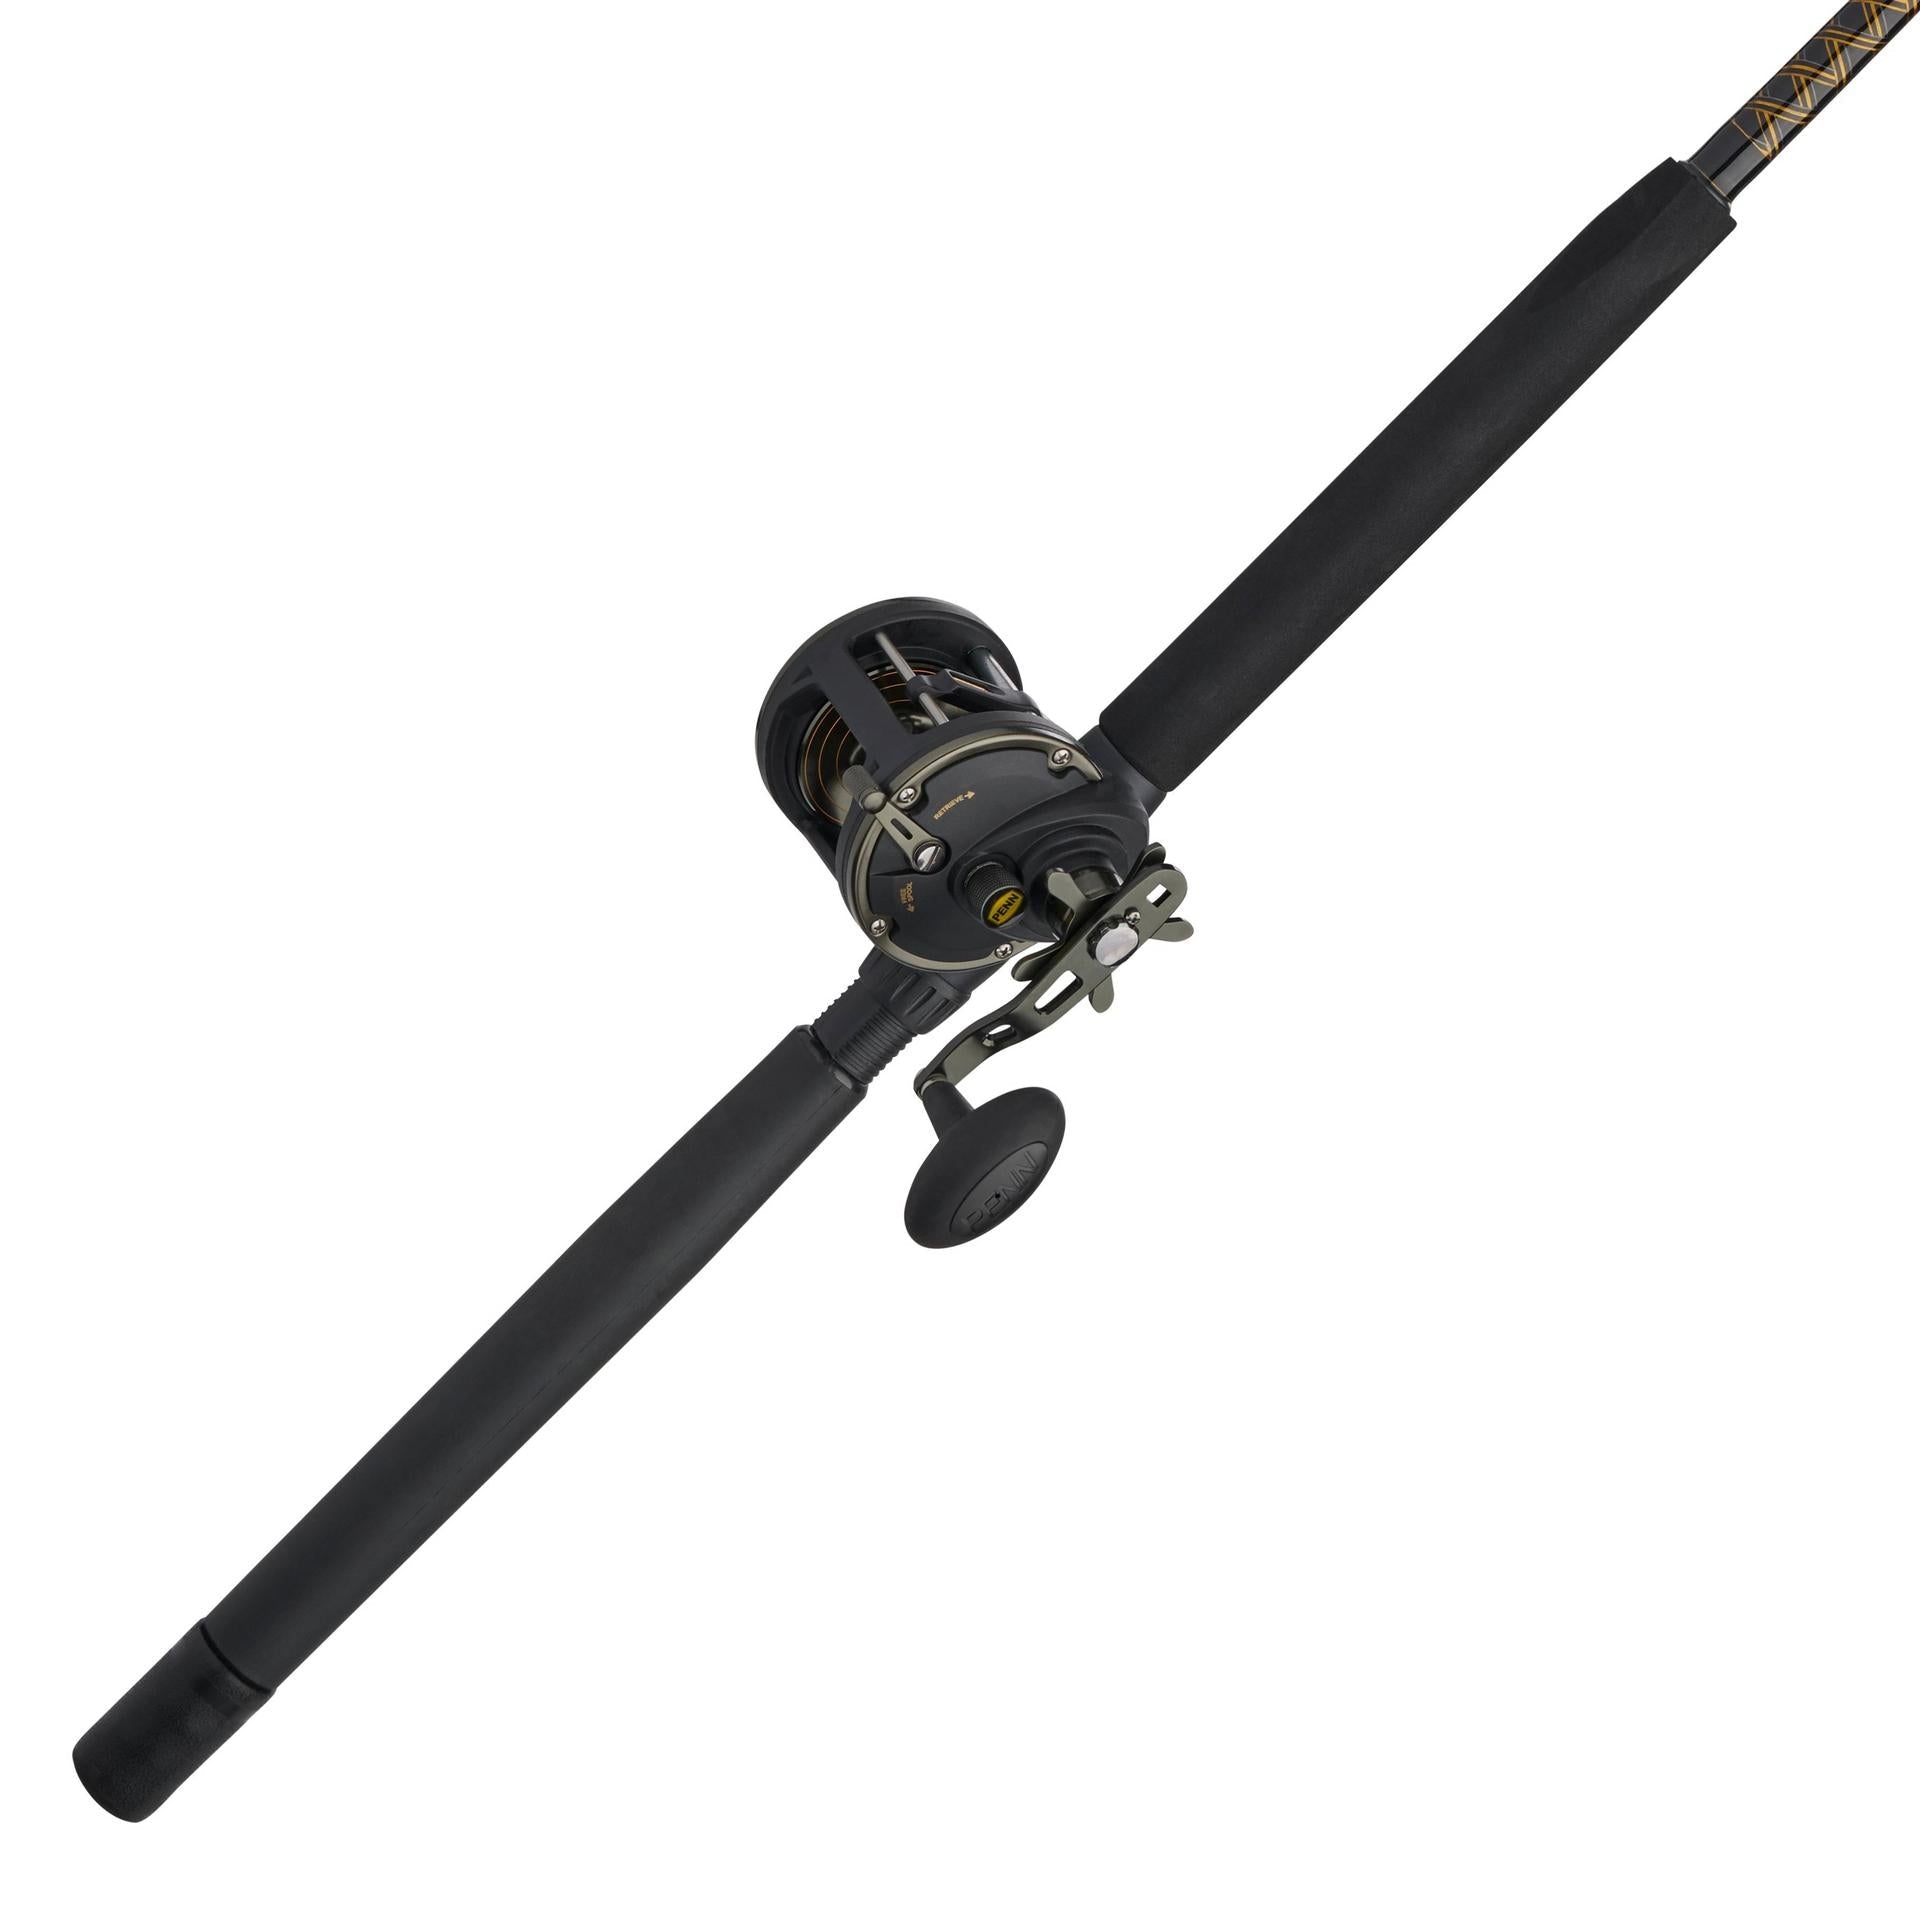 Squall® II Level Wind Conventional Rod & Reel Combo